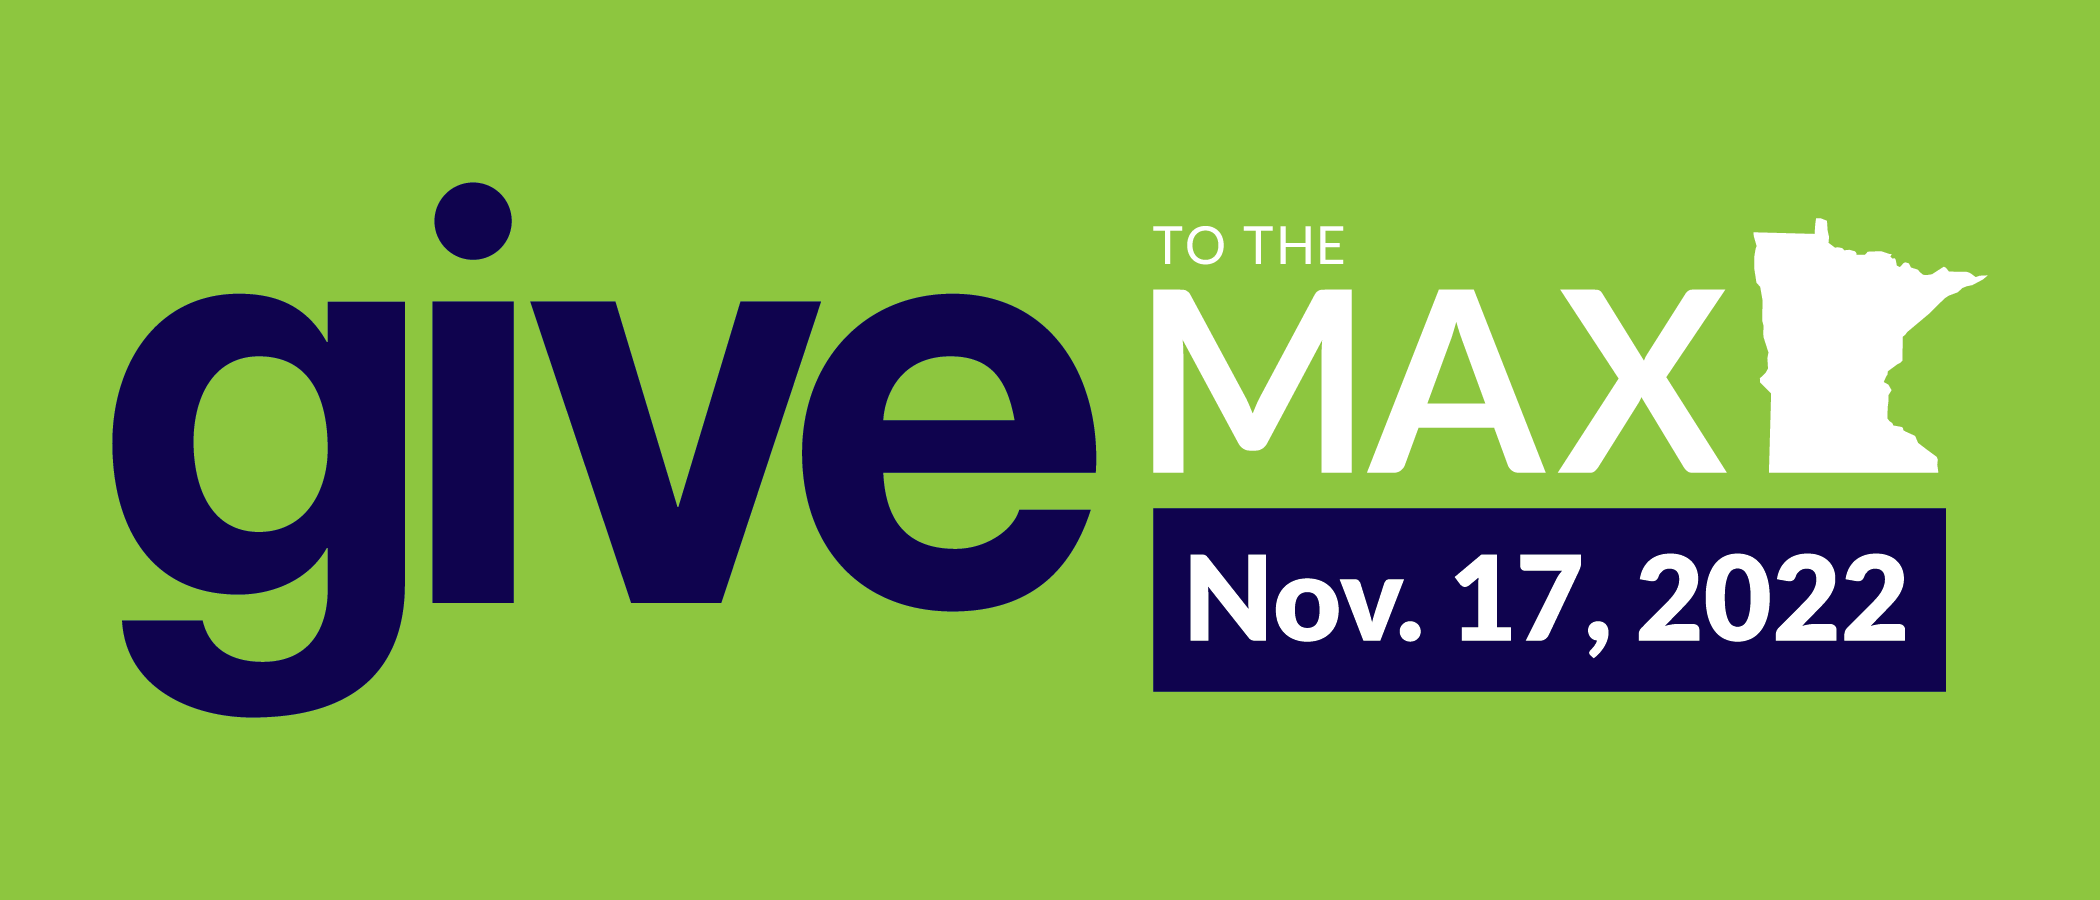 Please Support Northfield Youth Choirs on Give to the Max Day, Nov. 17, 2022